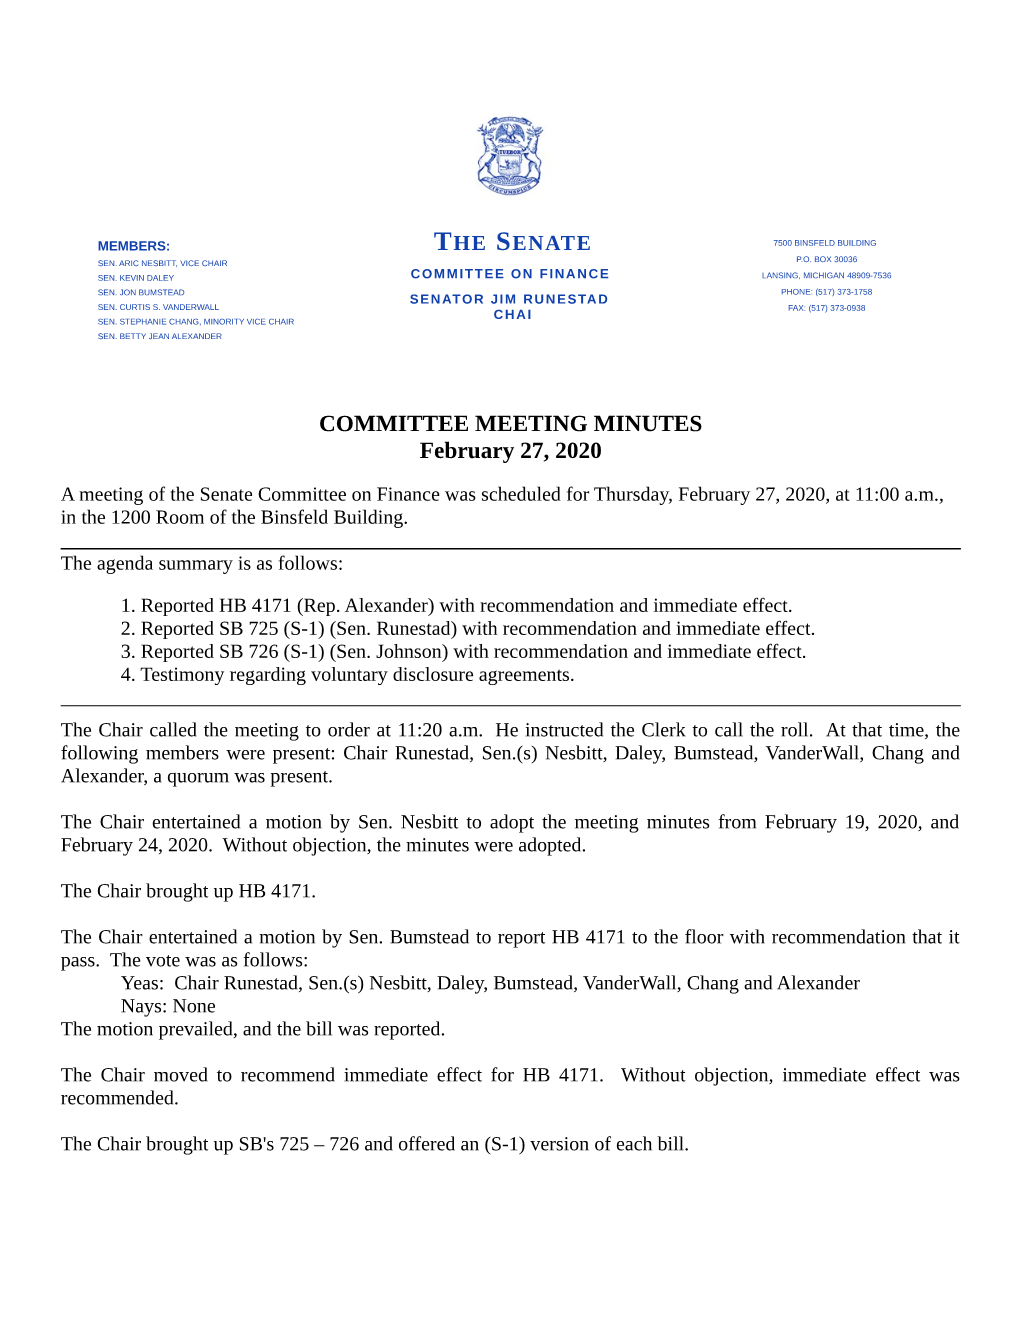 COMMITTEE MEETING MINUTES February 27, 2020